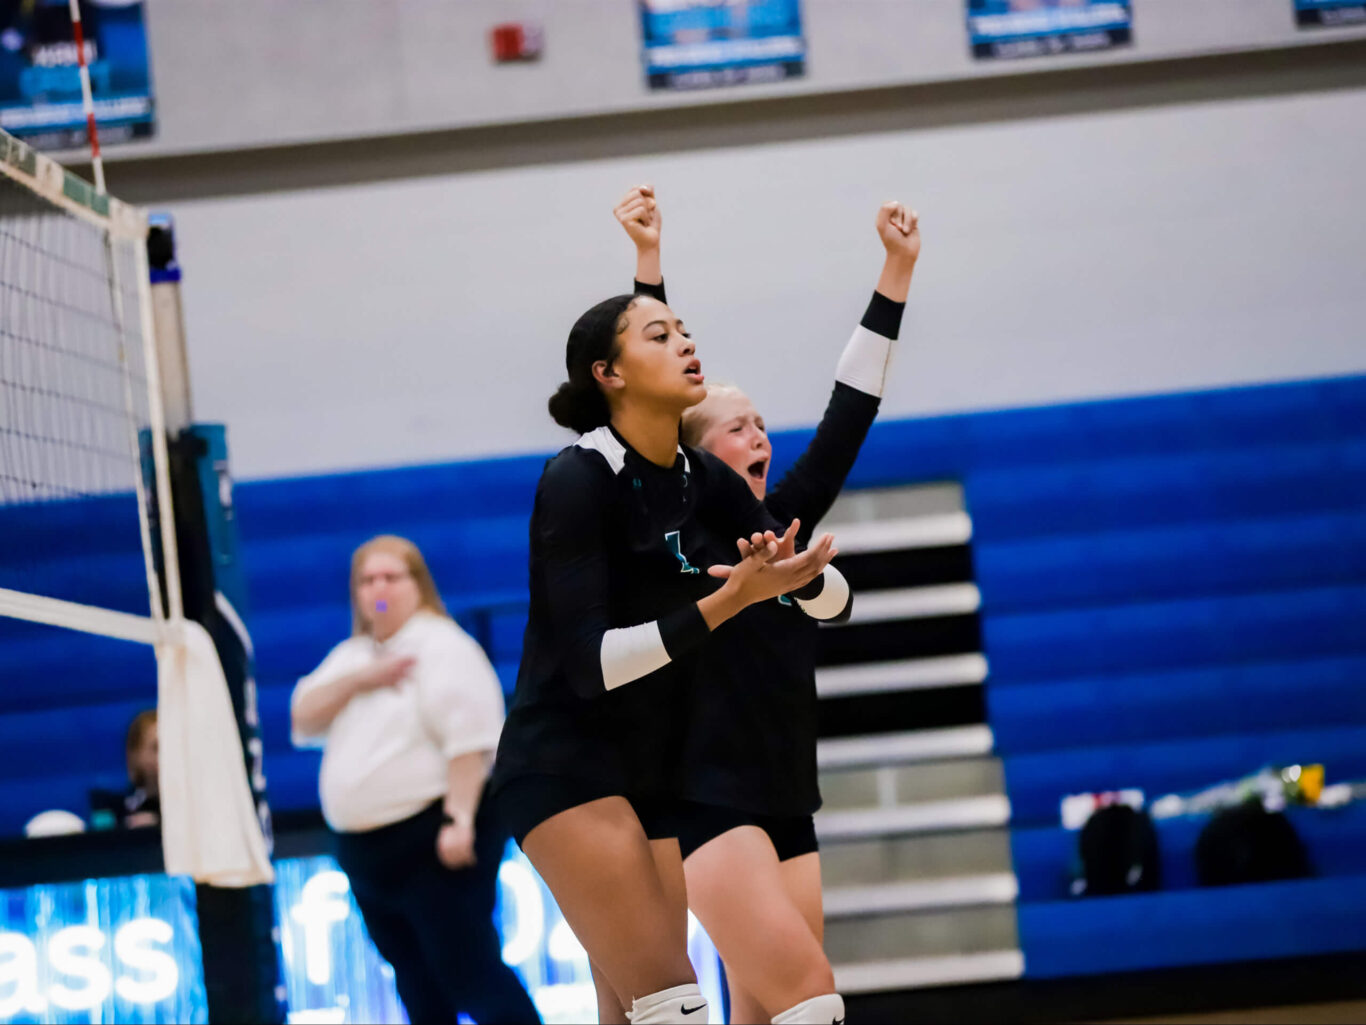 A volleyball player, typically a girl, is raising her arms in the air during a game.